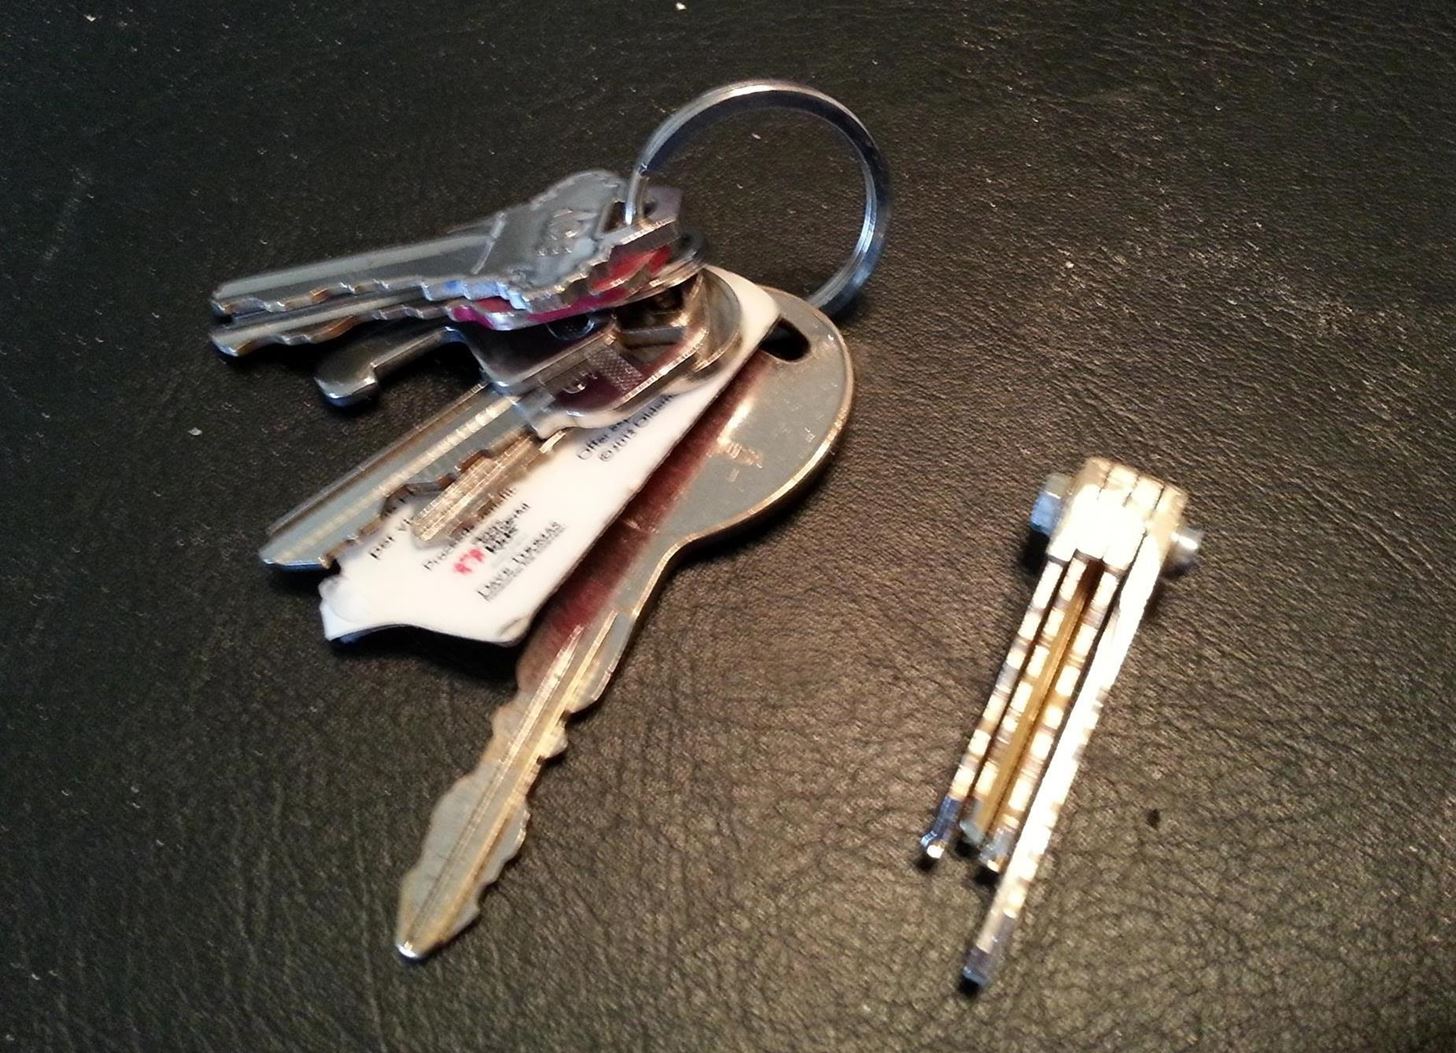 Trade in Your Bulky Set of Keys for This Simple DIY Swiss Army-Style Keychain